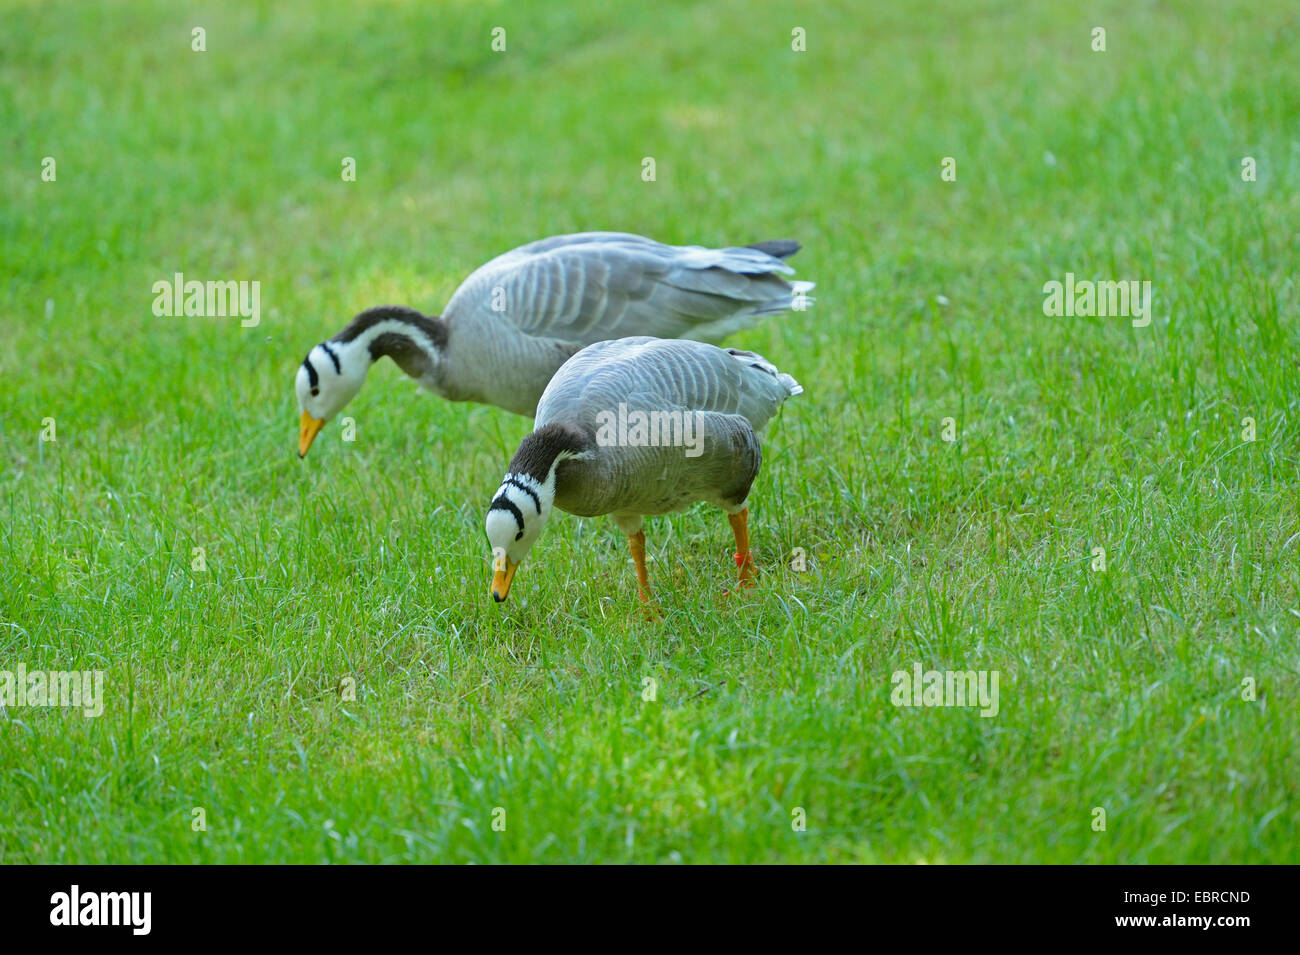 bar-headed goose (Anser indicus), two bar-headed geese on the feed in a meadow Stock Photo